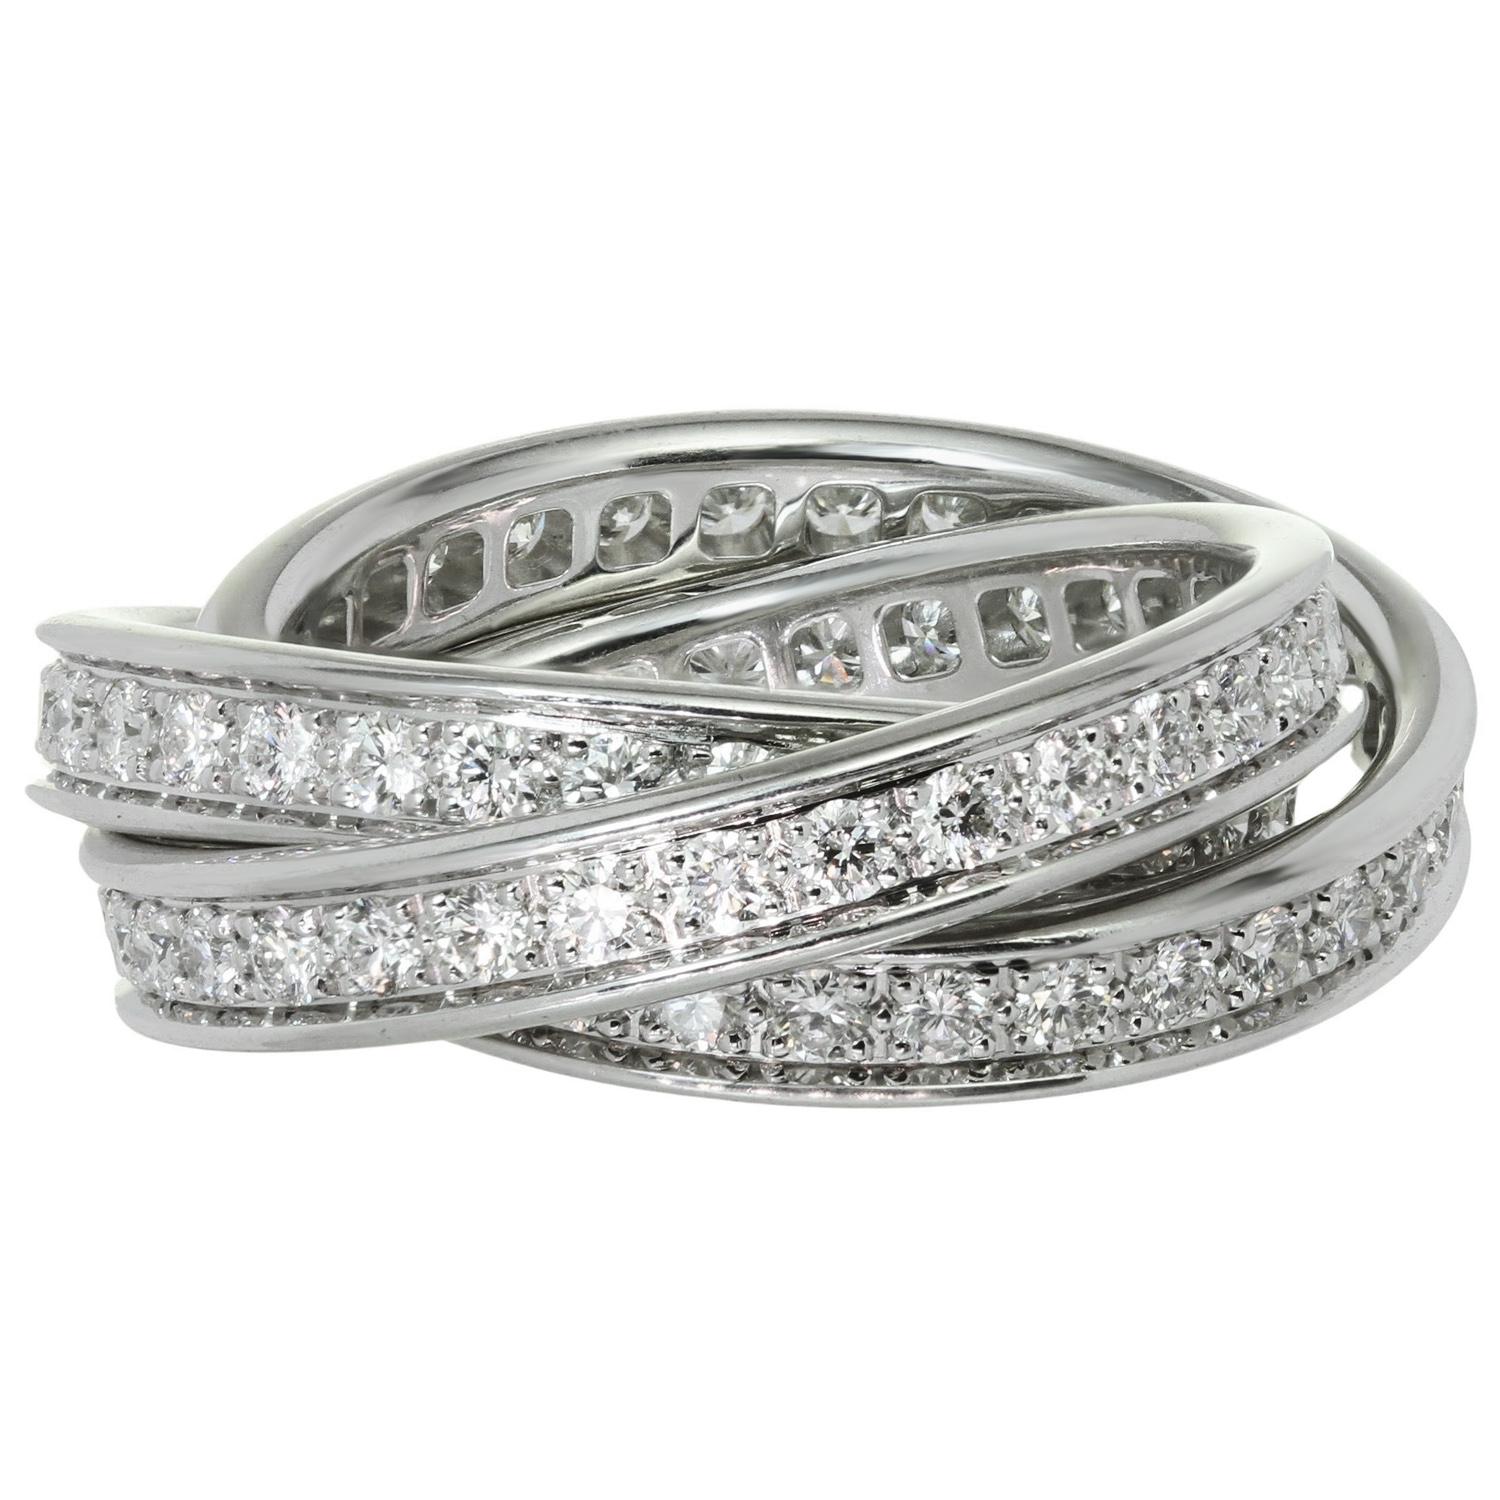 This iconic ring from Trinity de Cartier collection features 3 interconnected bands in crafted 18k white gold and pave-set with with brilliant-cut round D-F VVS1-VVS2 diamonds. Made in France circa 2010s. Measurements: 0.27